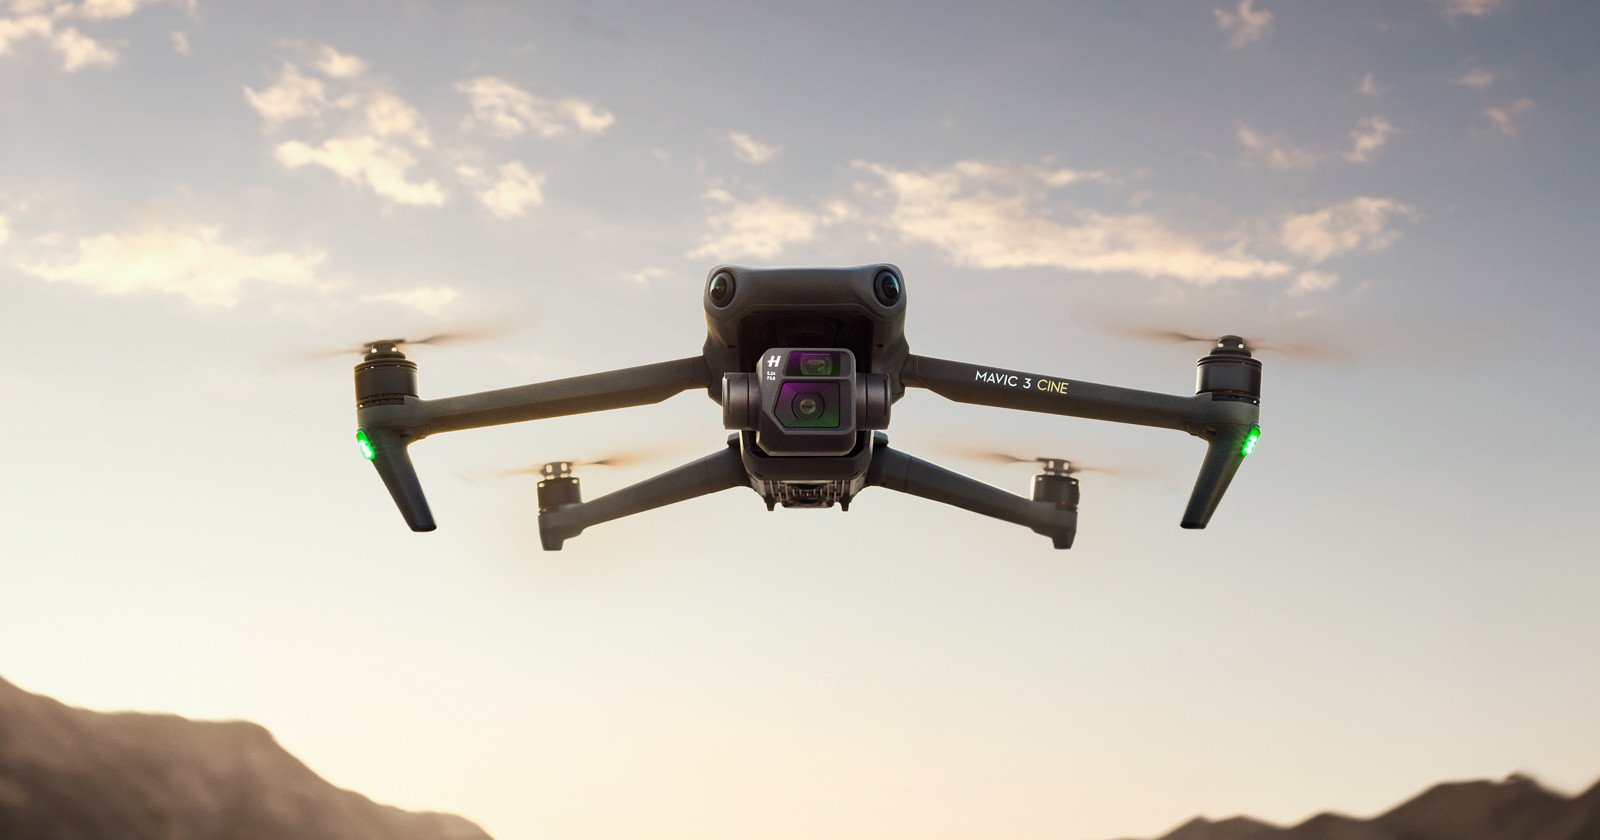 DJI Updates Mavic 3: It Now Has All Capabilities Promised at Launch